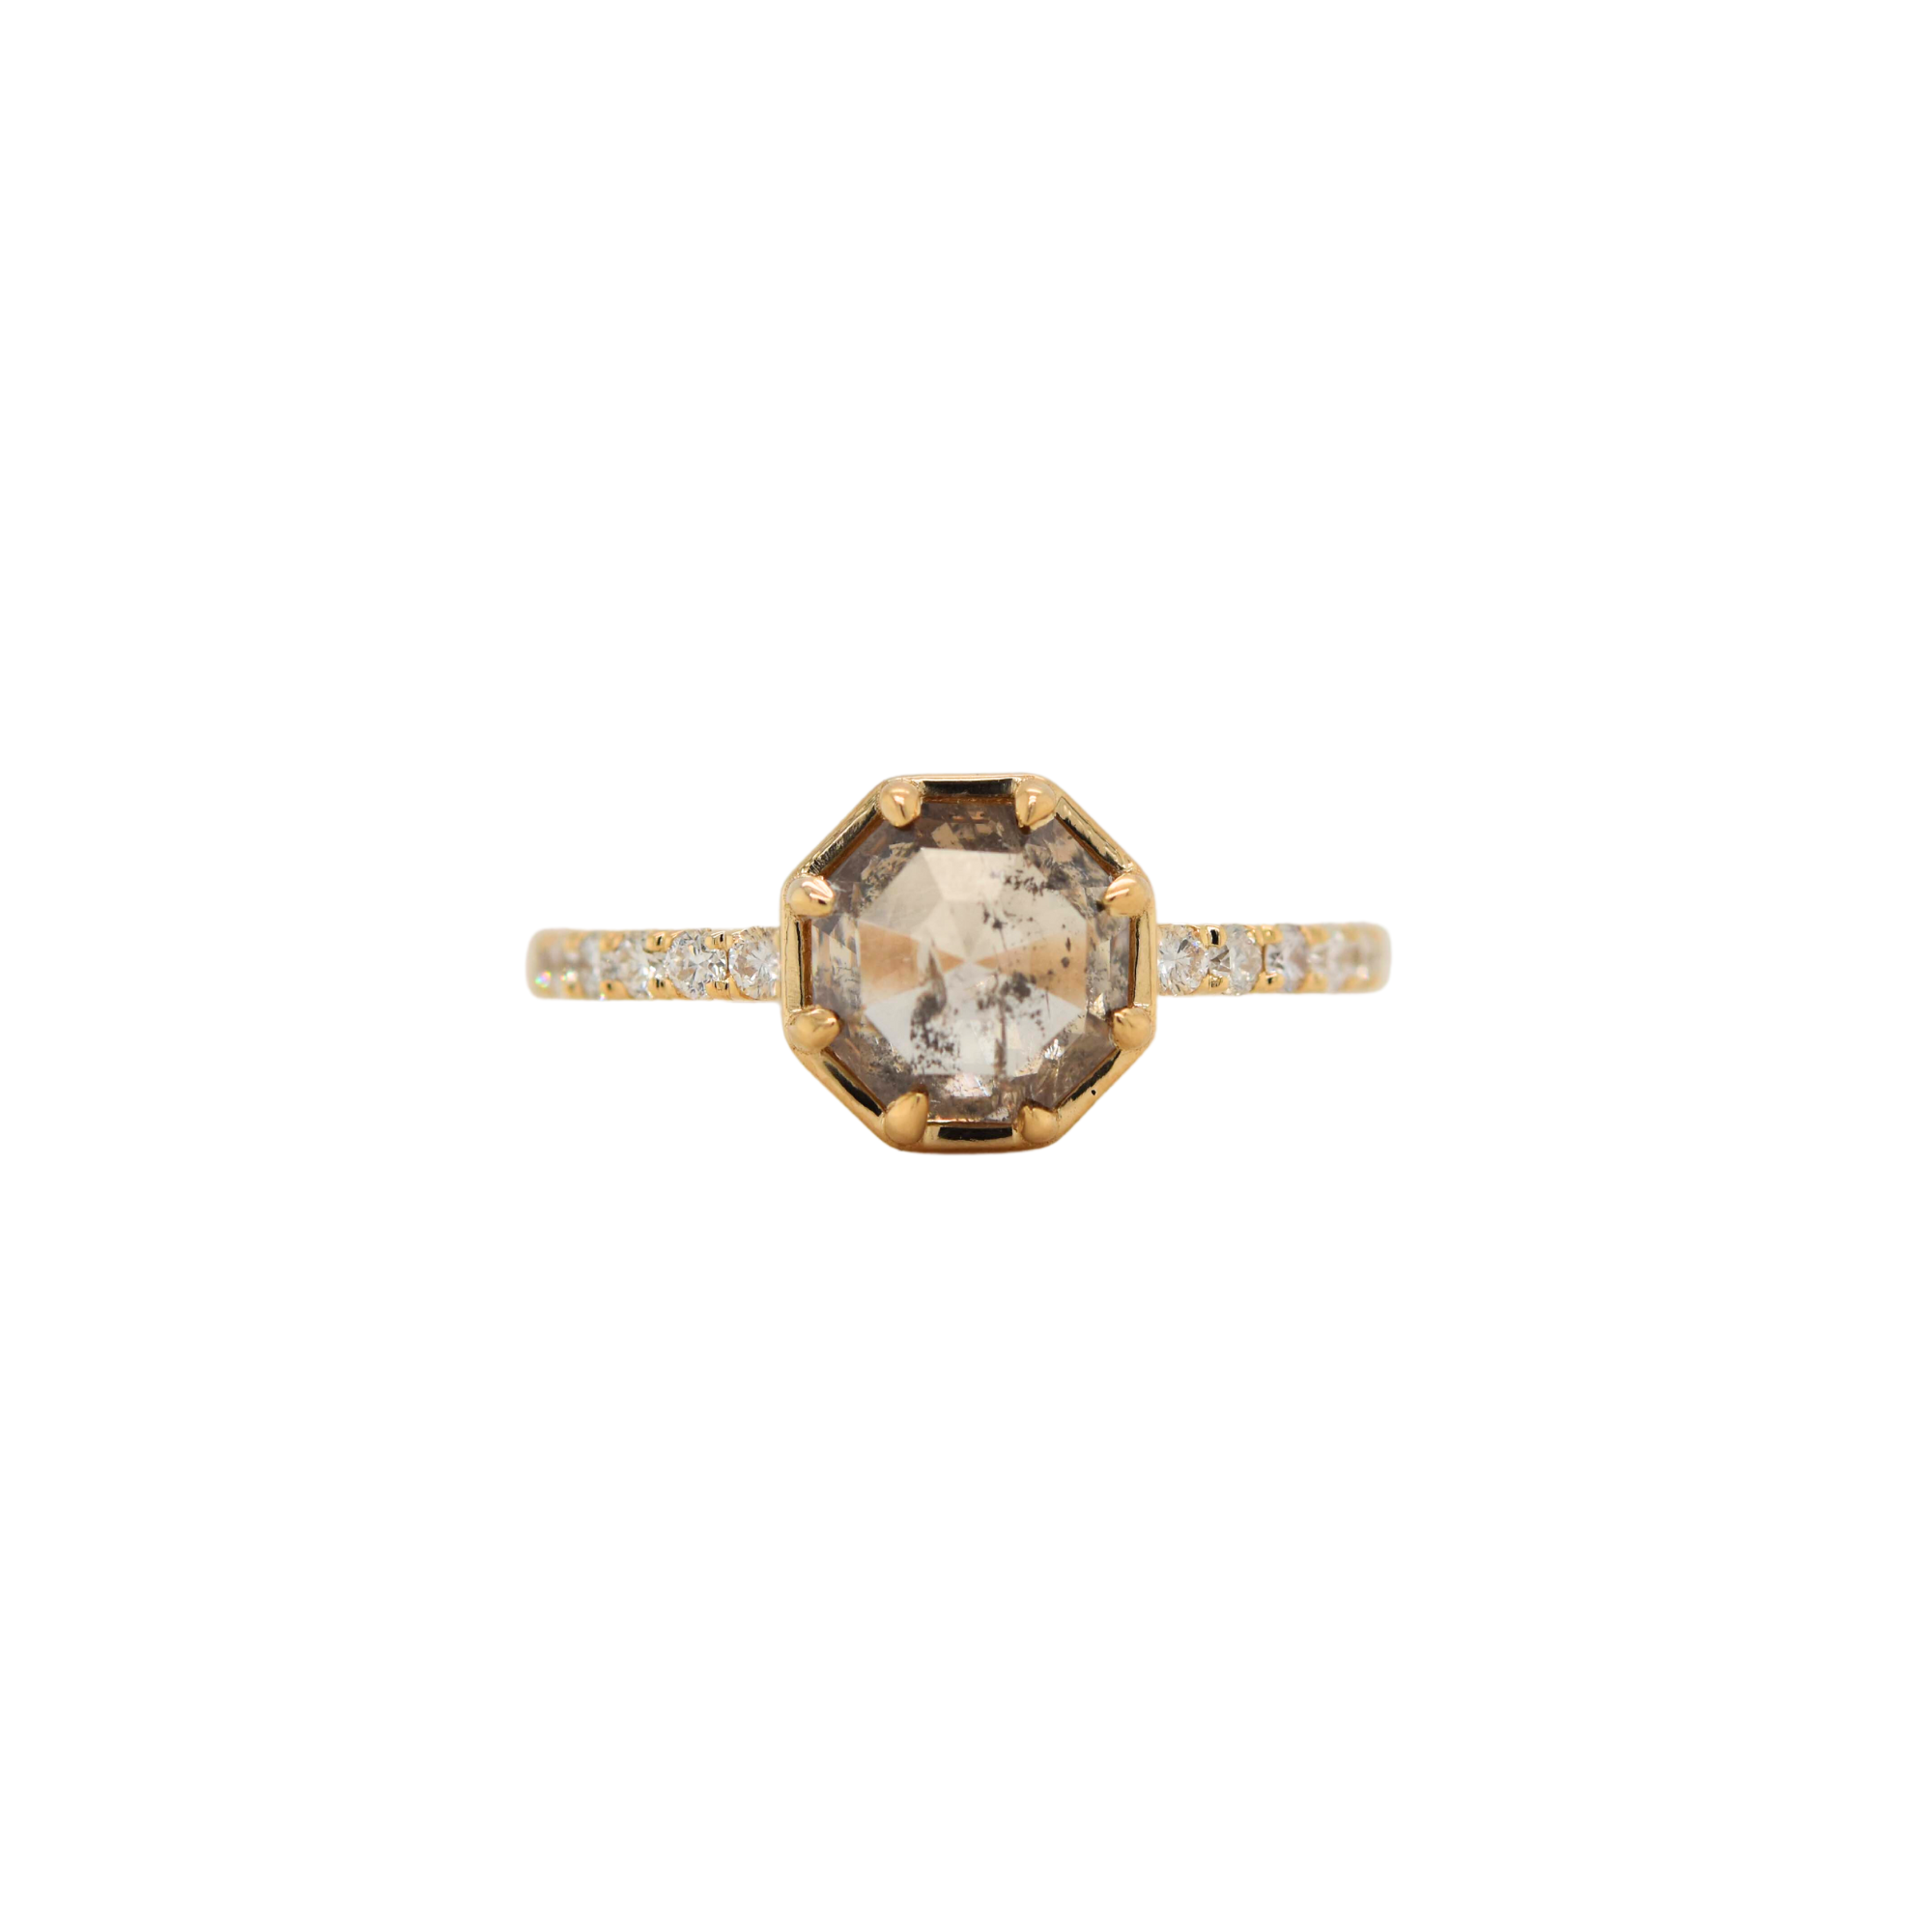 Shelter Anniversary Collection: One Of A Kind Champagne Diamond Ring